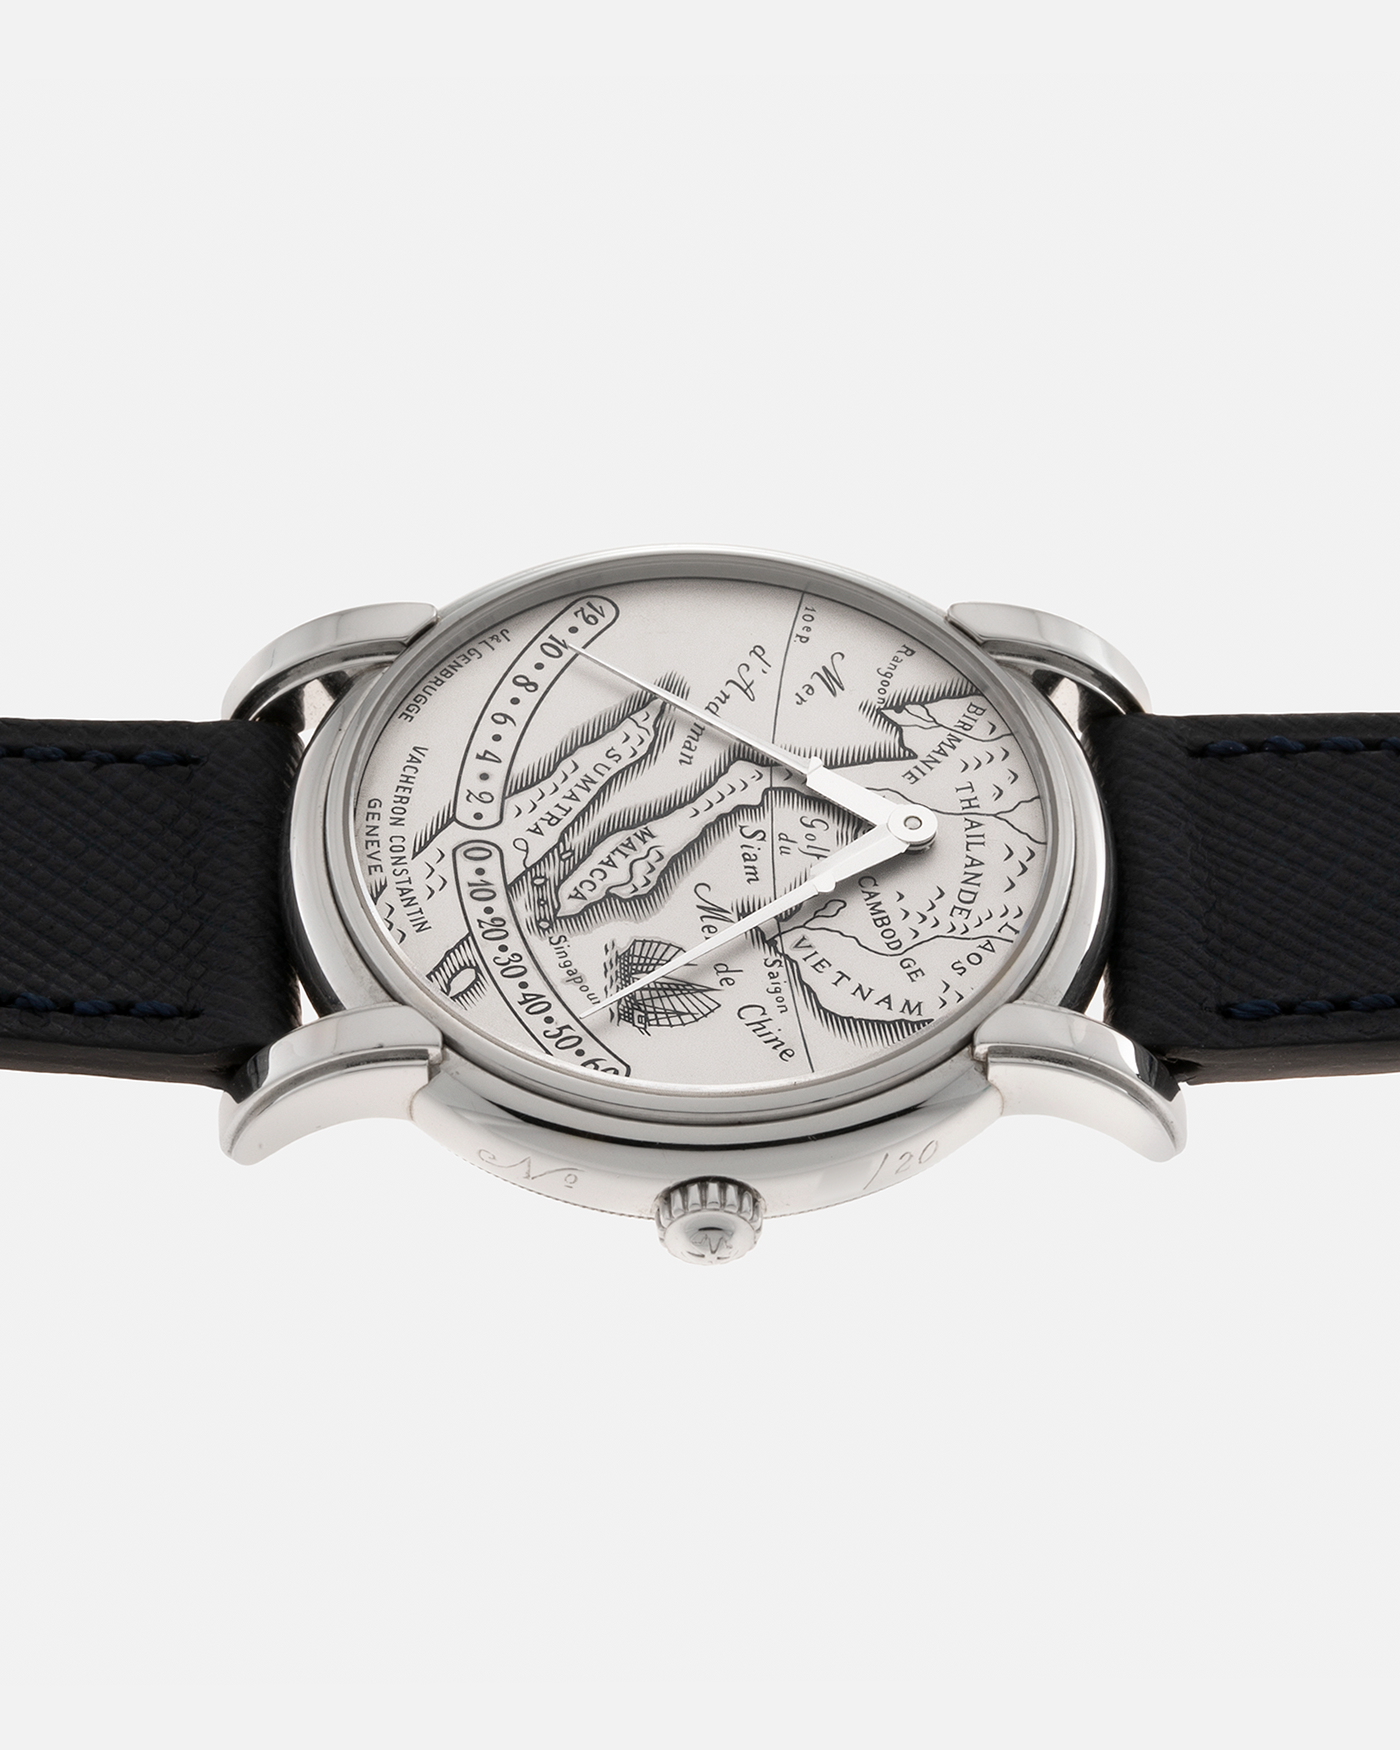 Brand: Vacheron Constantin Year: 1999 Model: Mercator, Southeast Asia Limited Edition of 20 pieces Reference Number: 43050 Material: Platinum Movement: Vacheron Constantin Cal. 1120 M (JLC Cal. 920 derived), Self-Winding Case Diameter: 36mm Lug Width: 19mm Strap: Molequin Navy Blue Textured Calf Leather Strap with Signed 18-carat White Gold Deployant Clasp